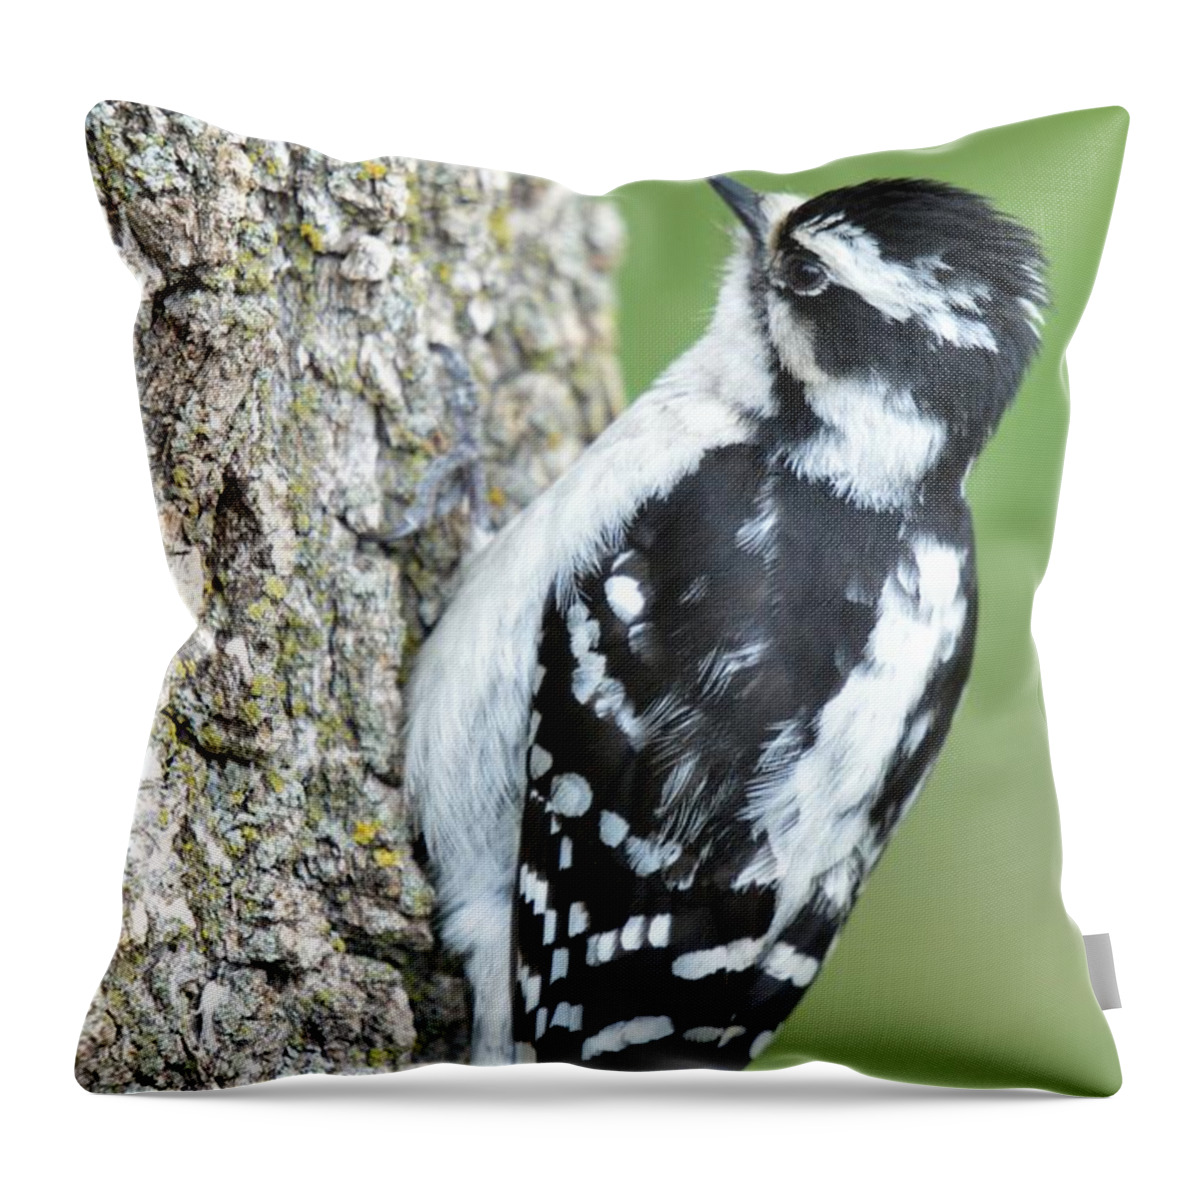 Animal Throw Pillow featuring the photograph Downy by Bonfire Photography